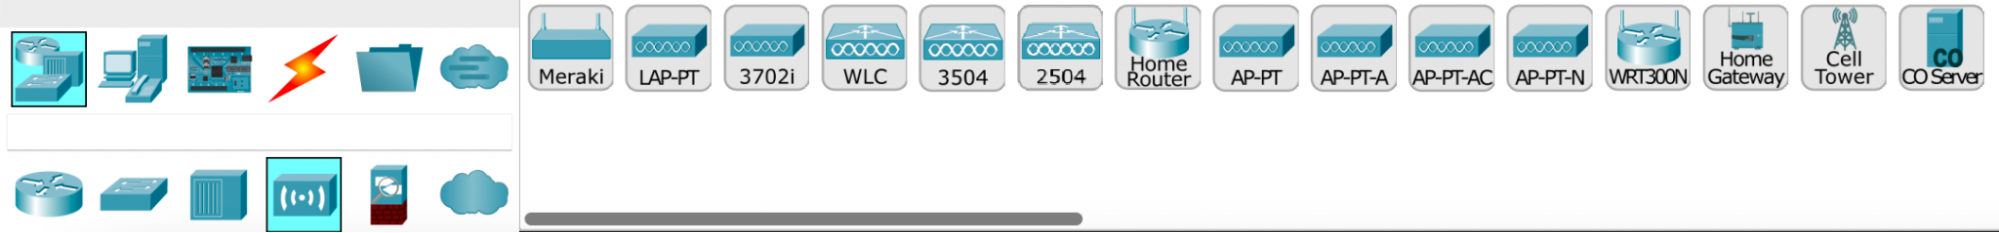 Screenshot of the wireless devices in Cisco Packet Tracer